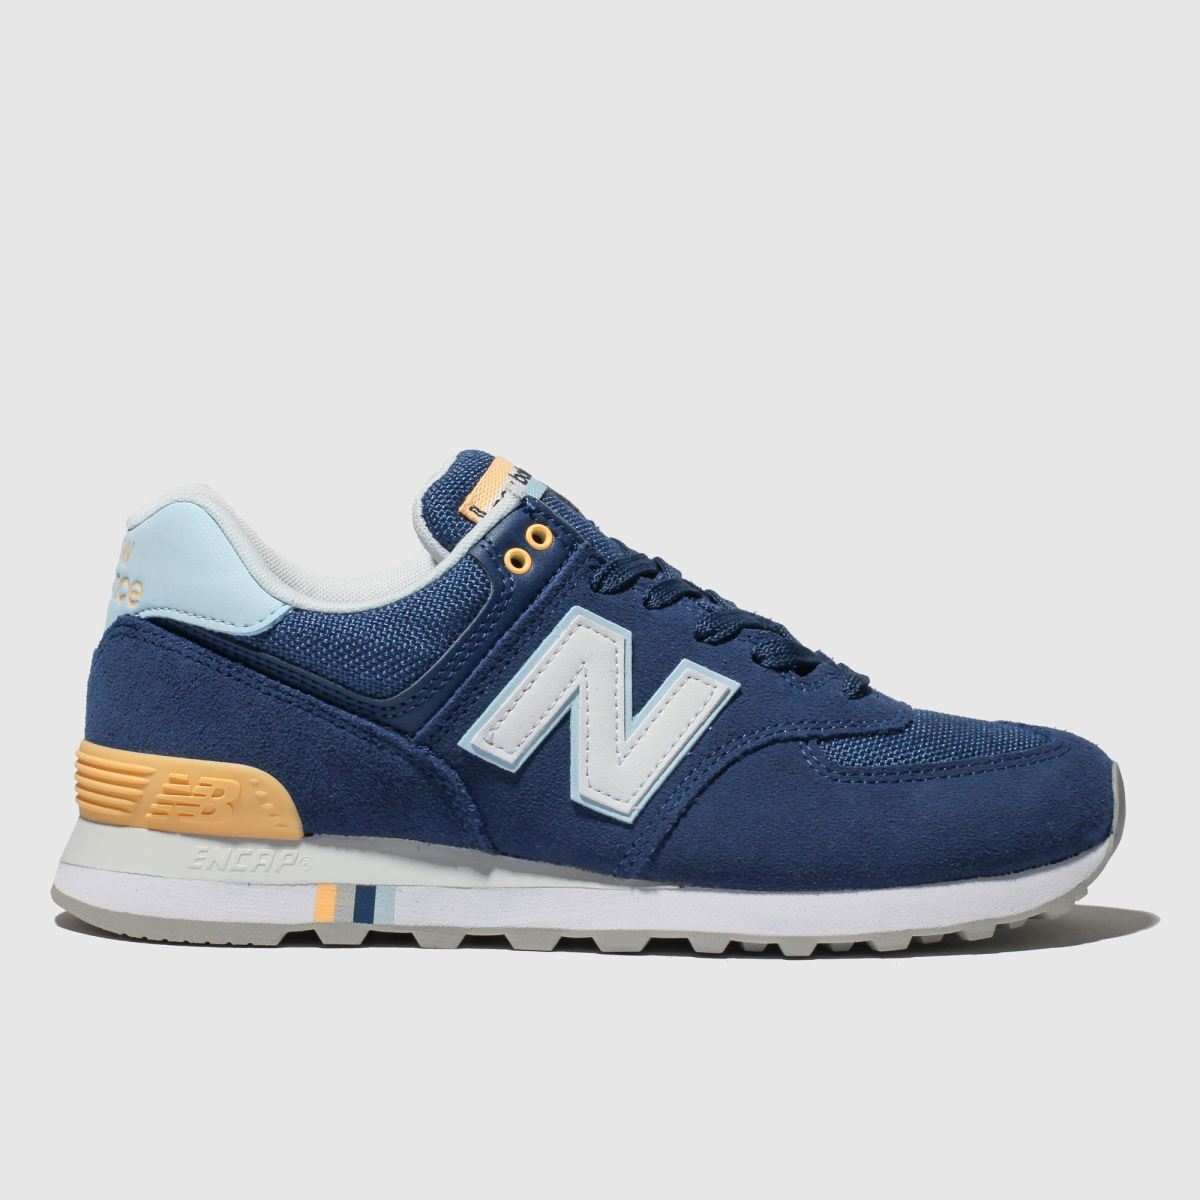 new balance 365 womens review